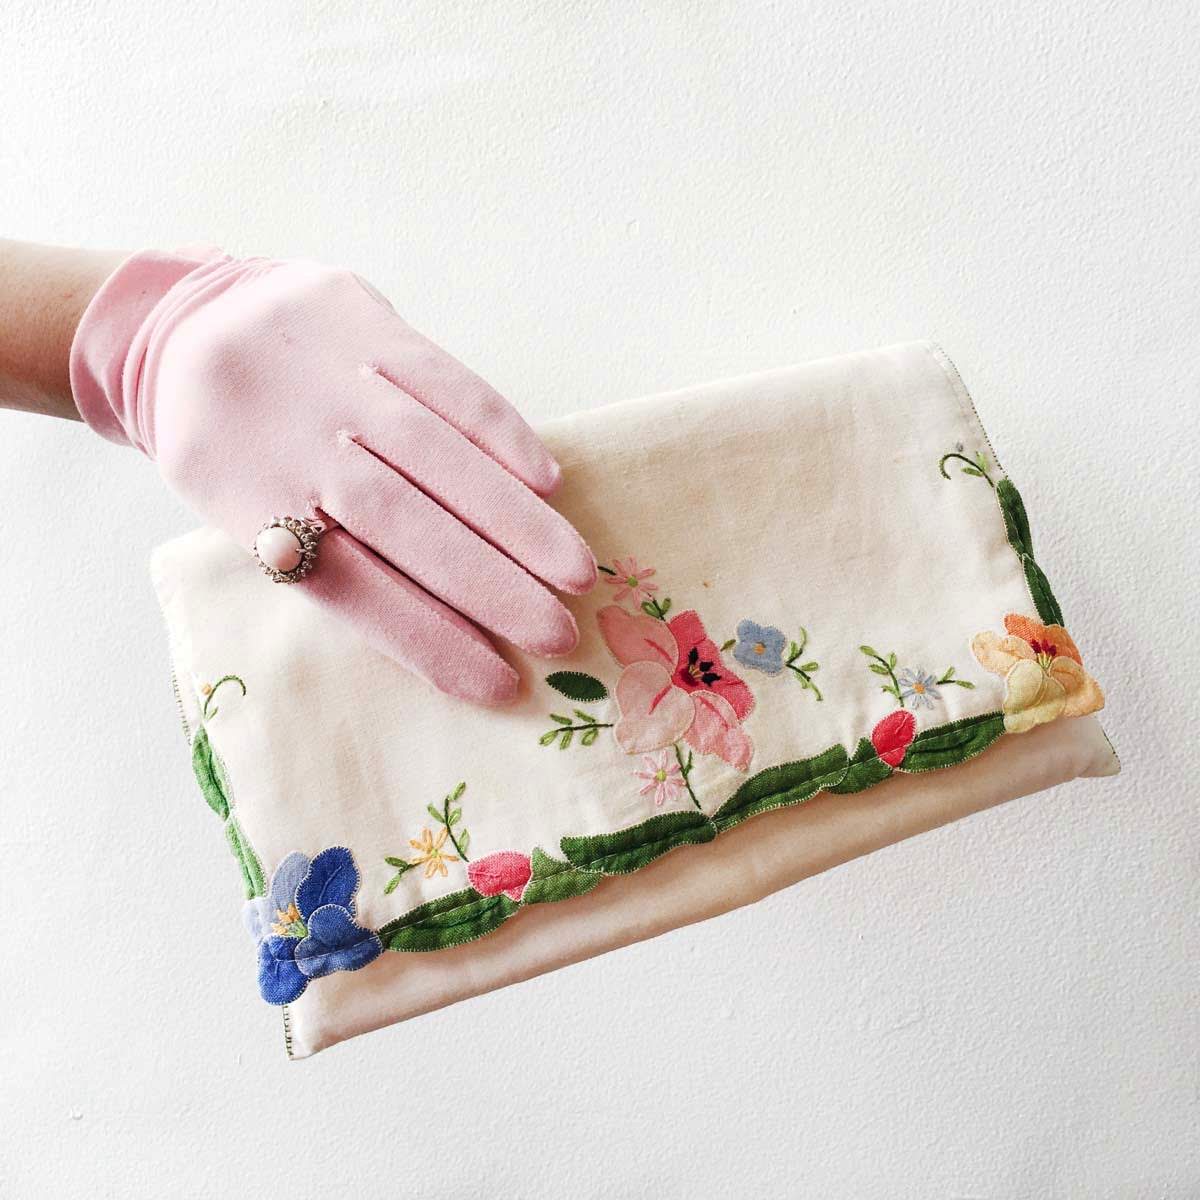 Victory White Floral Clutch Bag Vintage Accessories